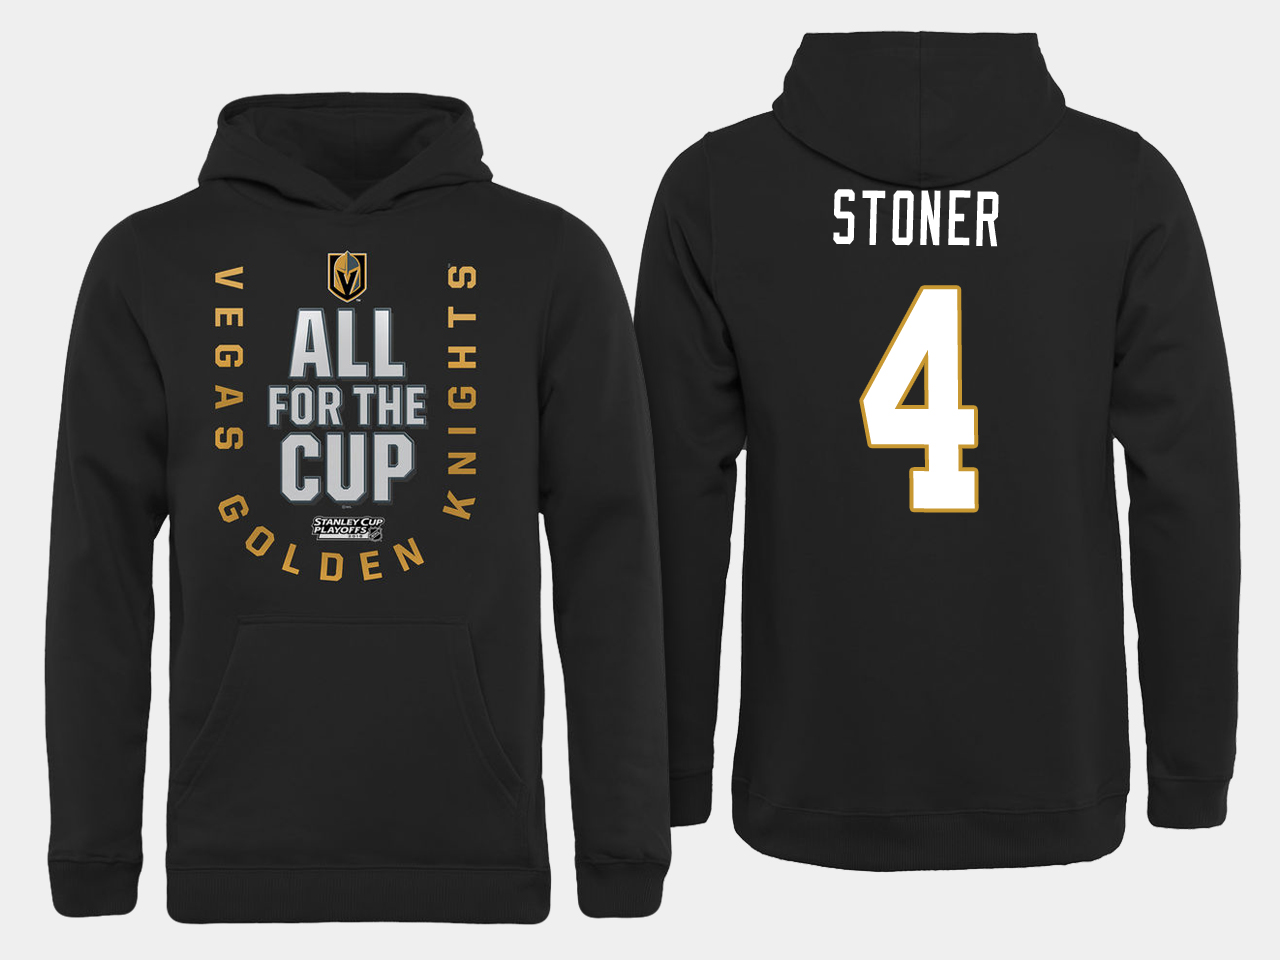 Men NHL Vegas Golden Knights #4 Stoner All for the Cup hoodie